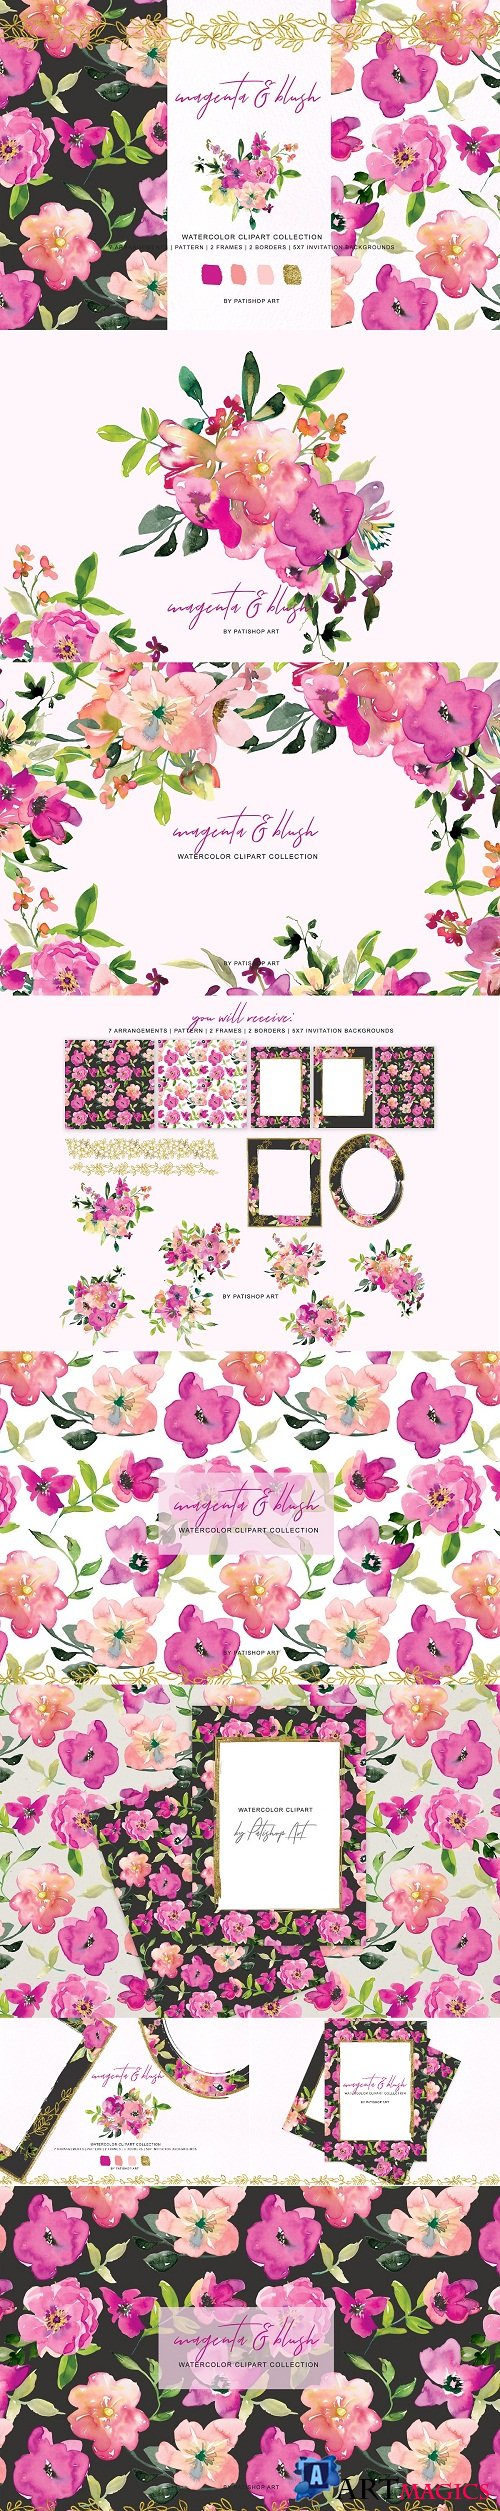 Watercolor Magenta and Blush Floral - 3591667